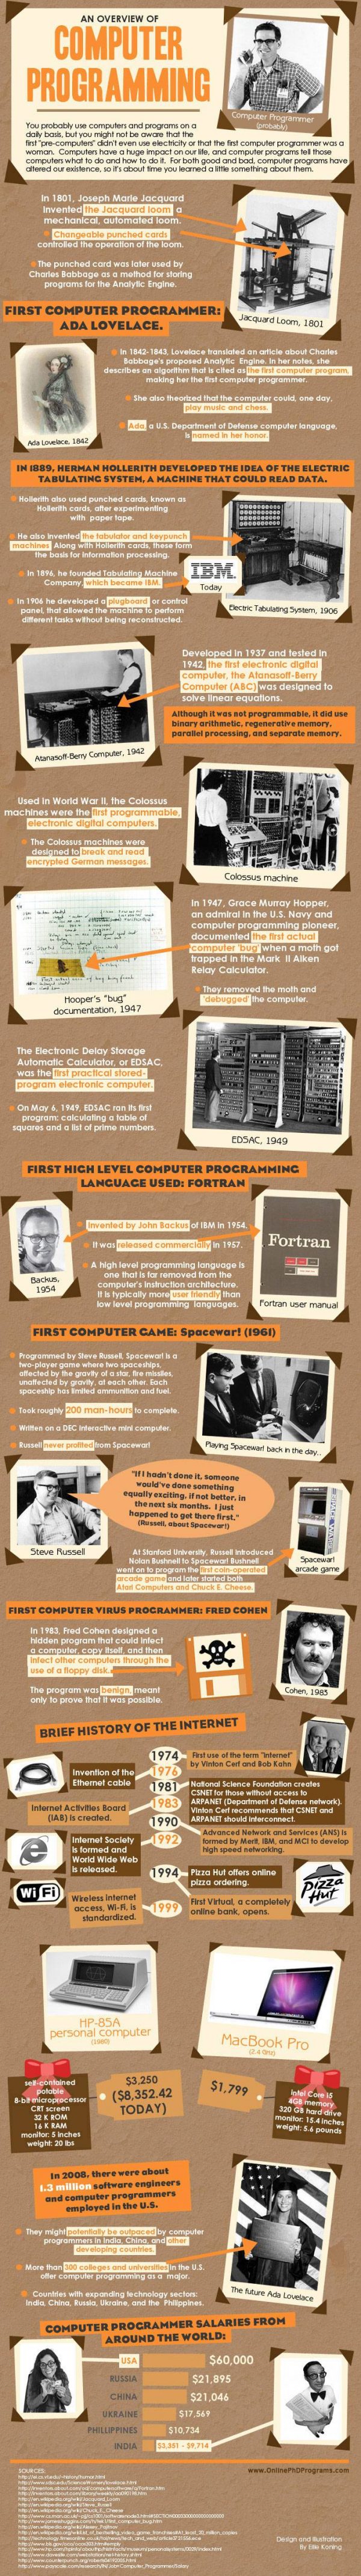 An overview of computer programming (Infographic)